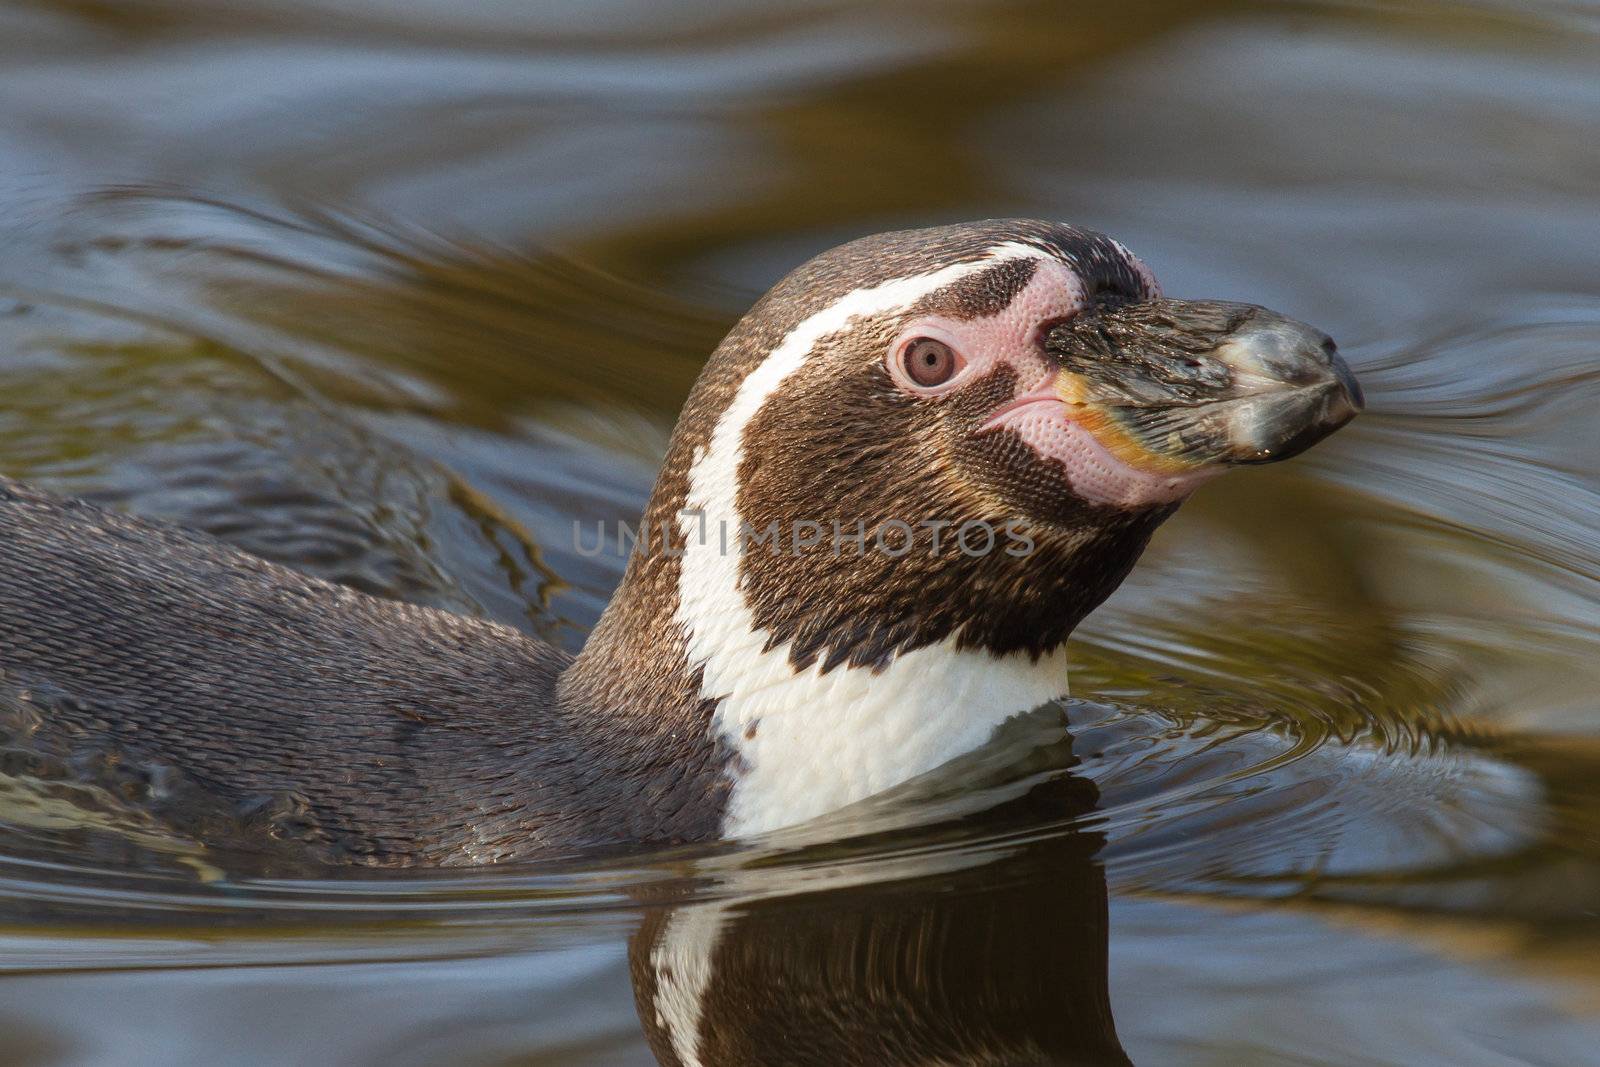 A swimming Humboldt penguin by michaklootwijk